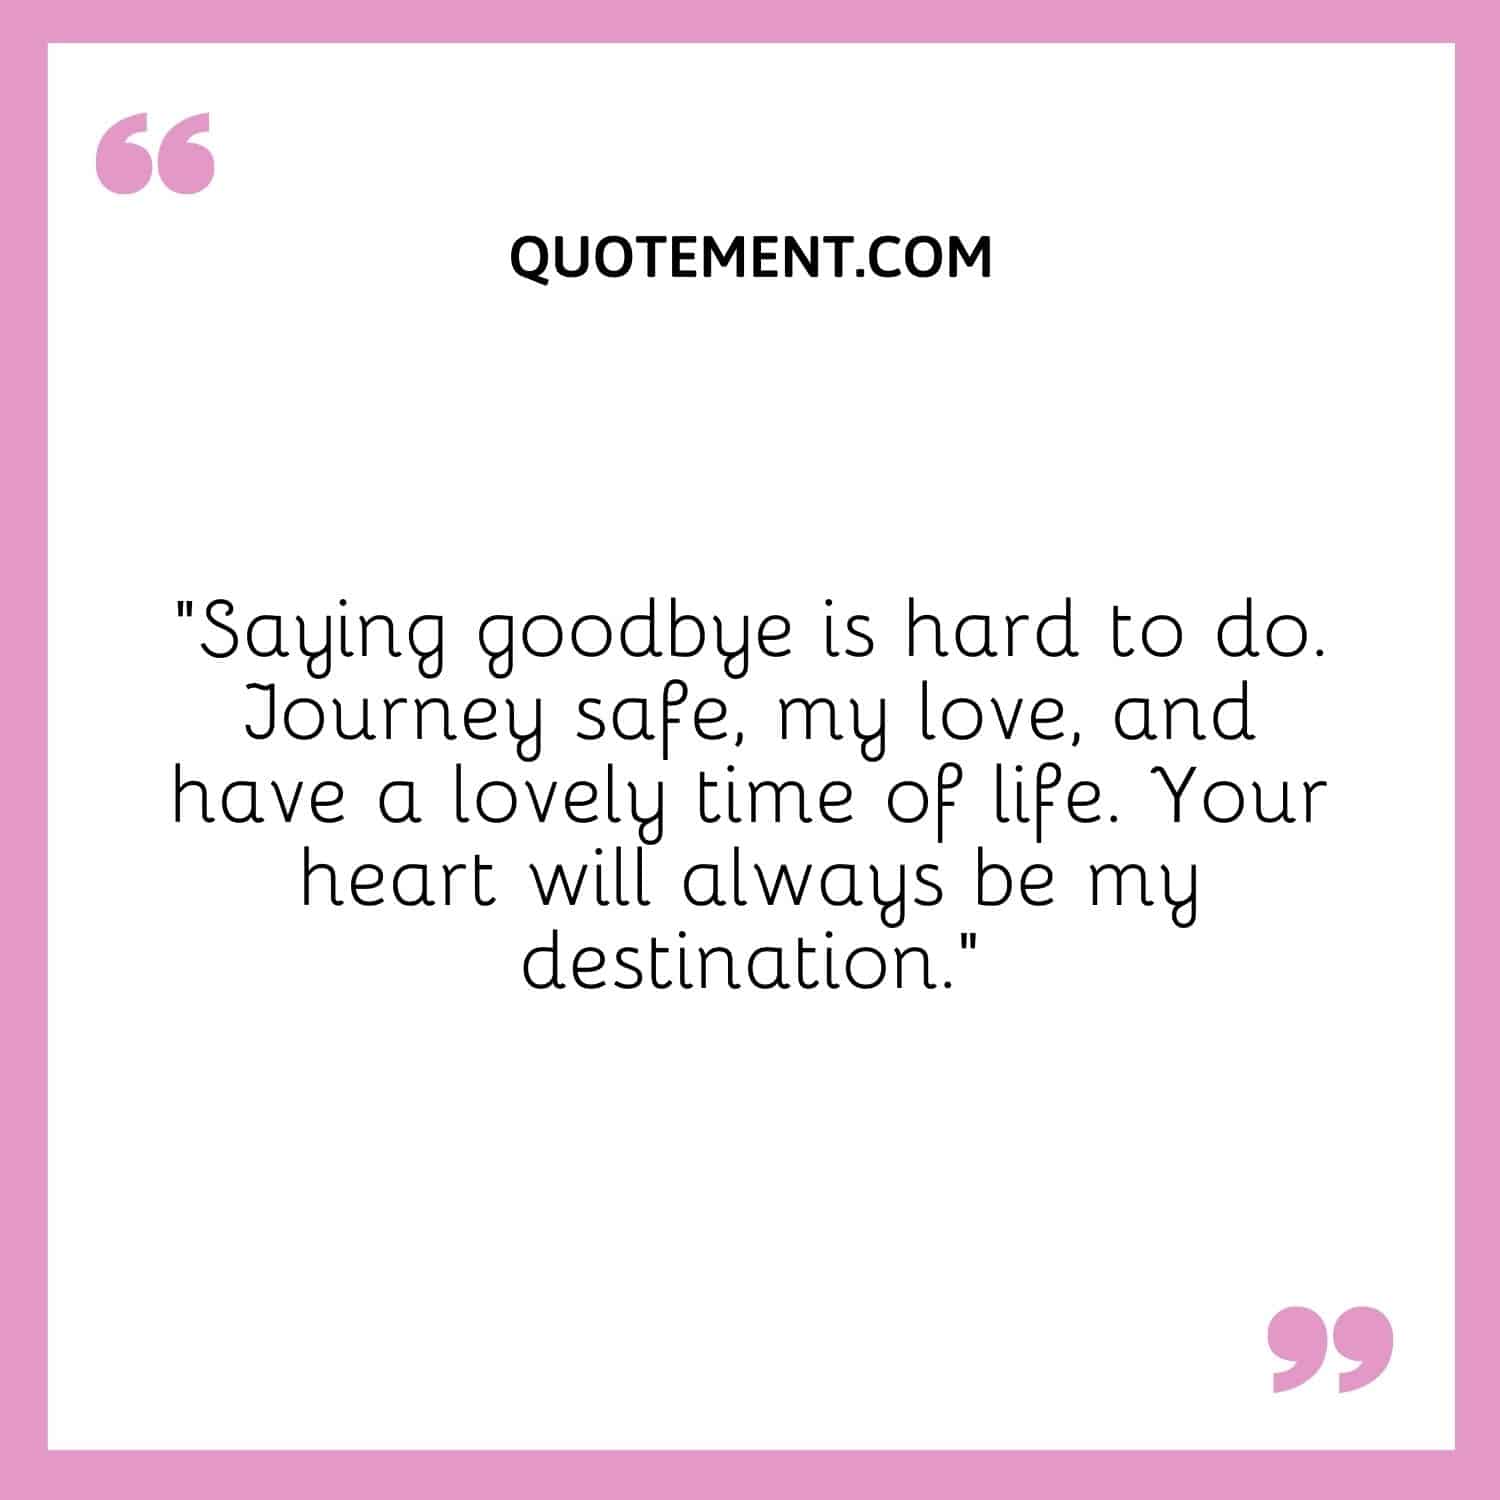 Saying goodbye is hard to do. Journey safe, my love, and have a lovely time of life. Your heart will always be my destination.